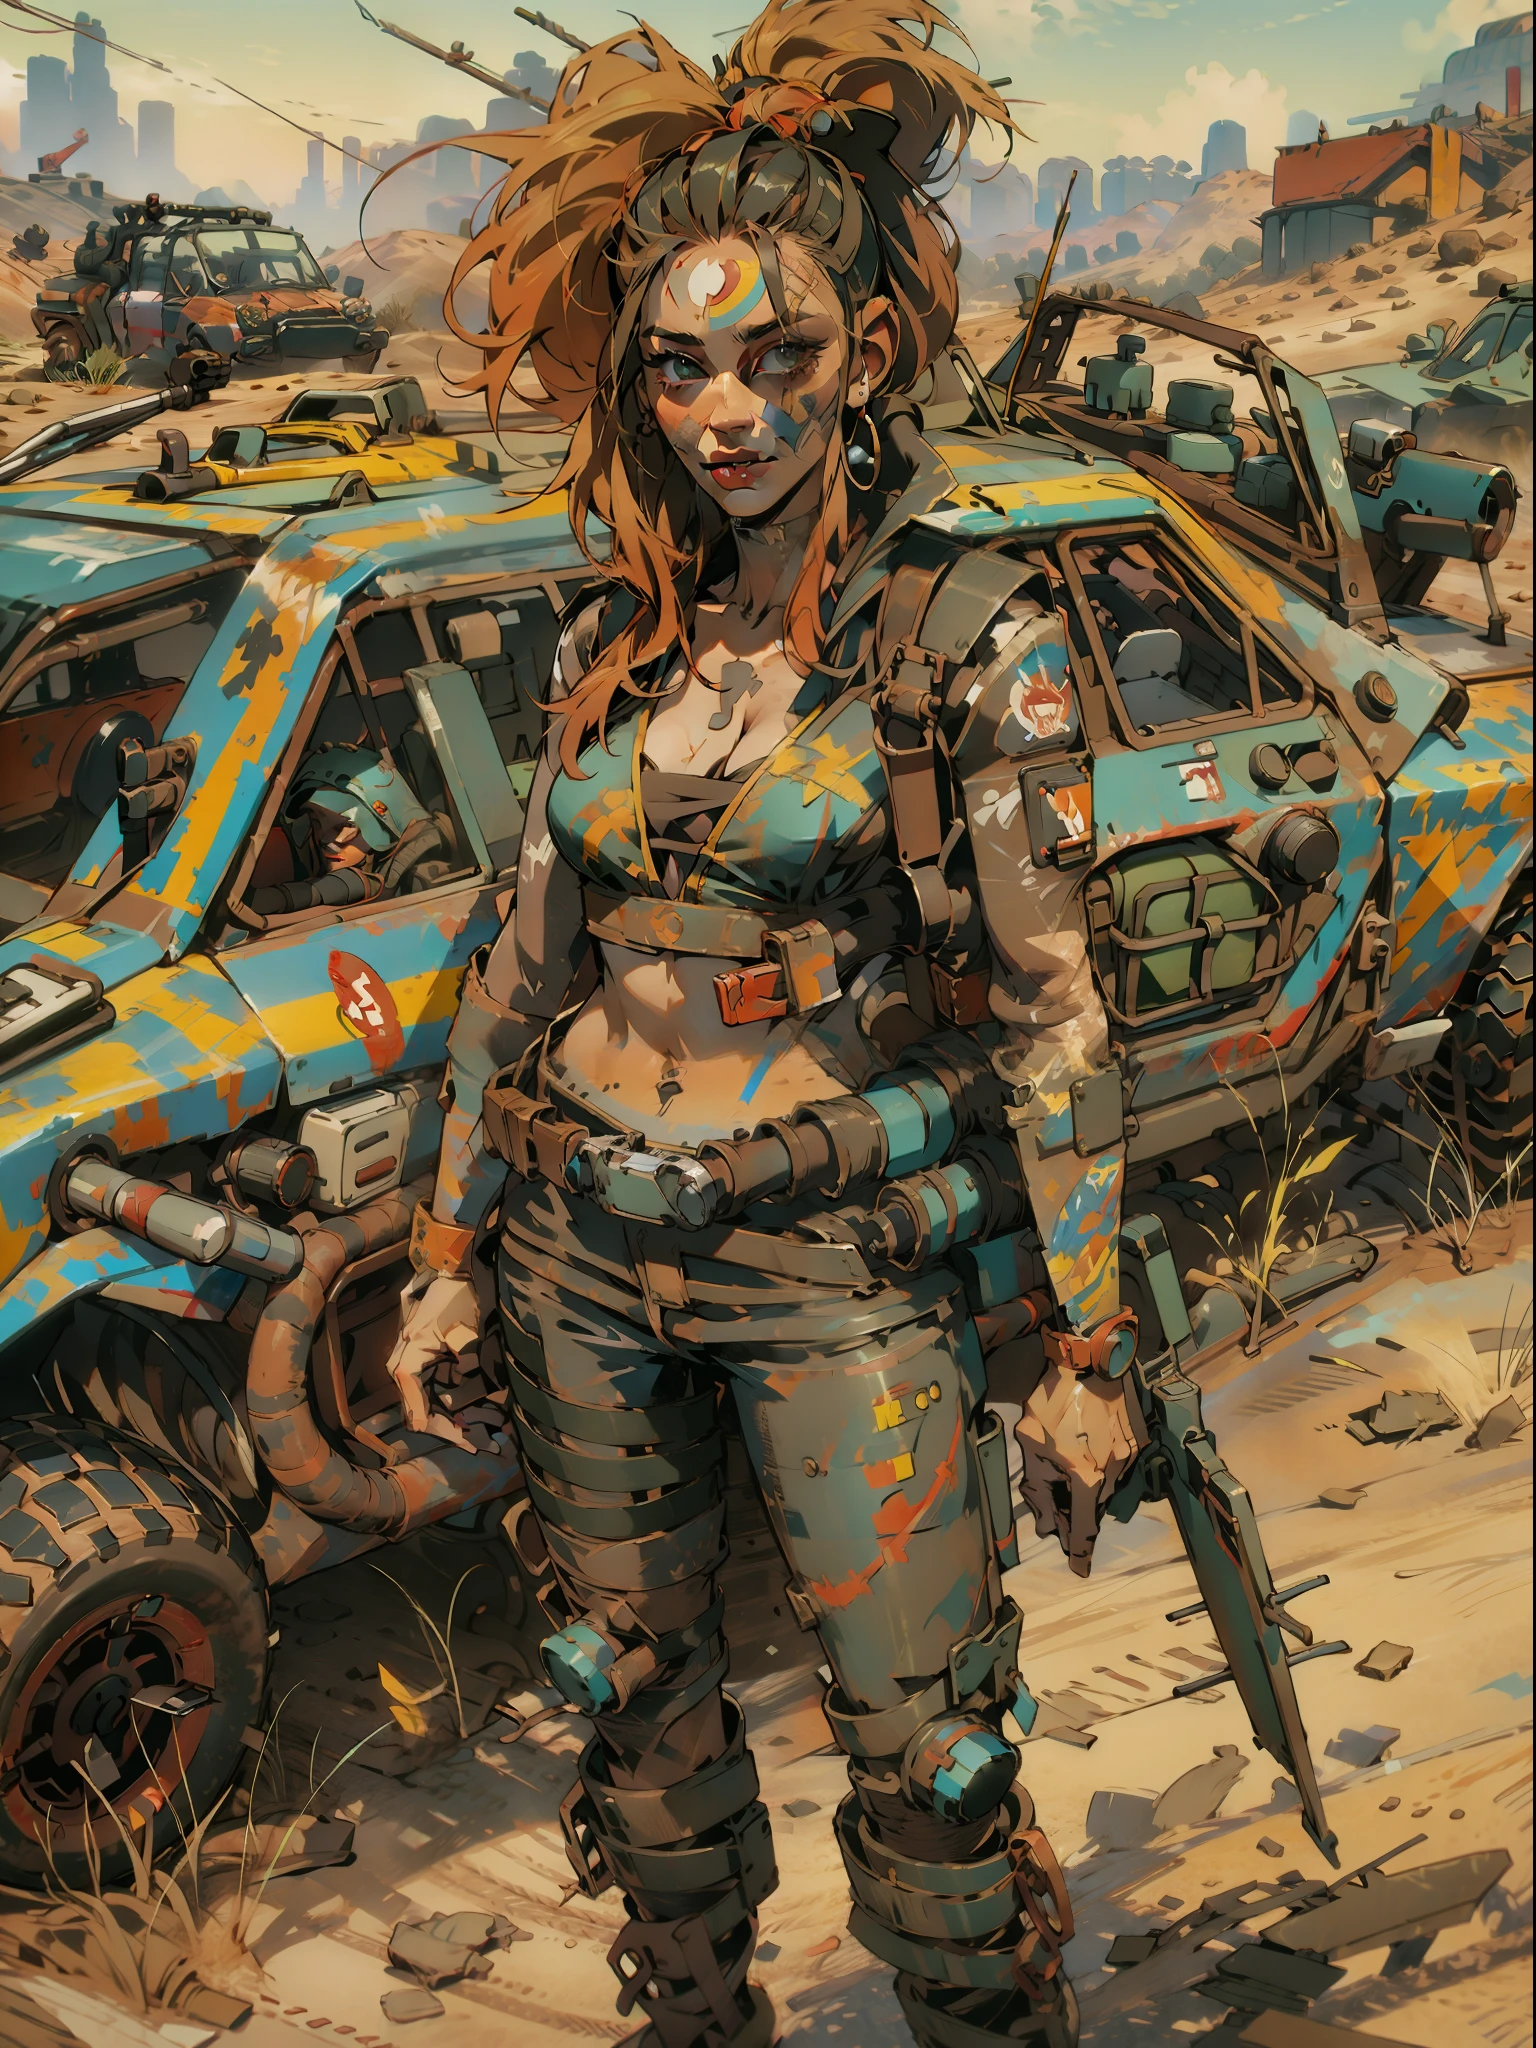 A post-apocalyptic warrior, close-up of a nearly naked Simon Bisley-style 35-year-old woman in a time-worn futuristic Mad Max-style car;, colored mohawk hair, Minimum clothing, short clothing, rage2vehicle